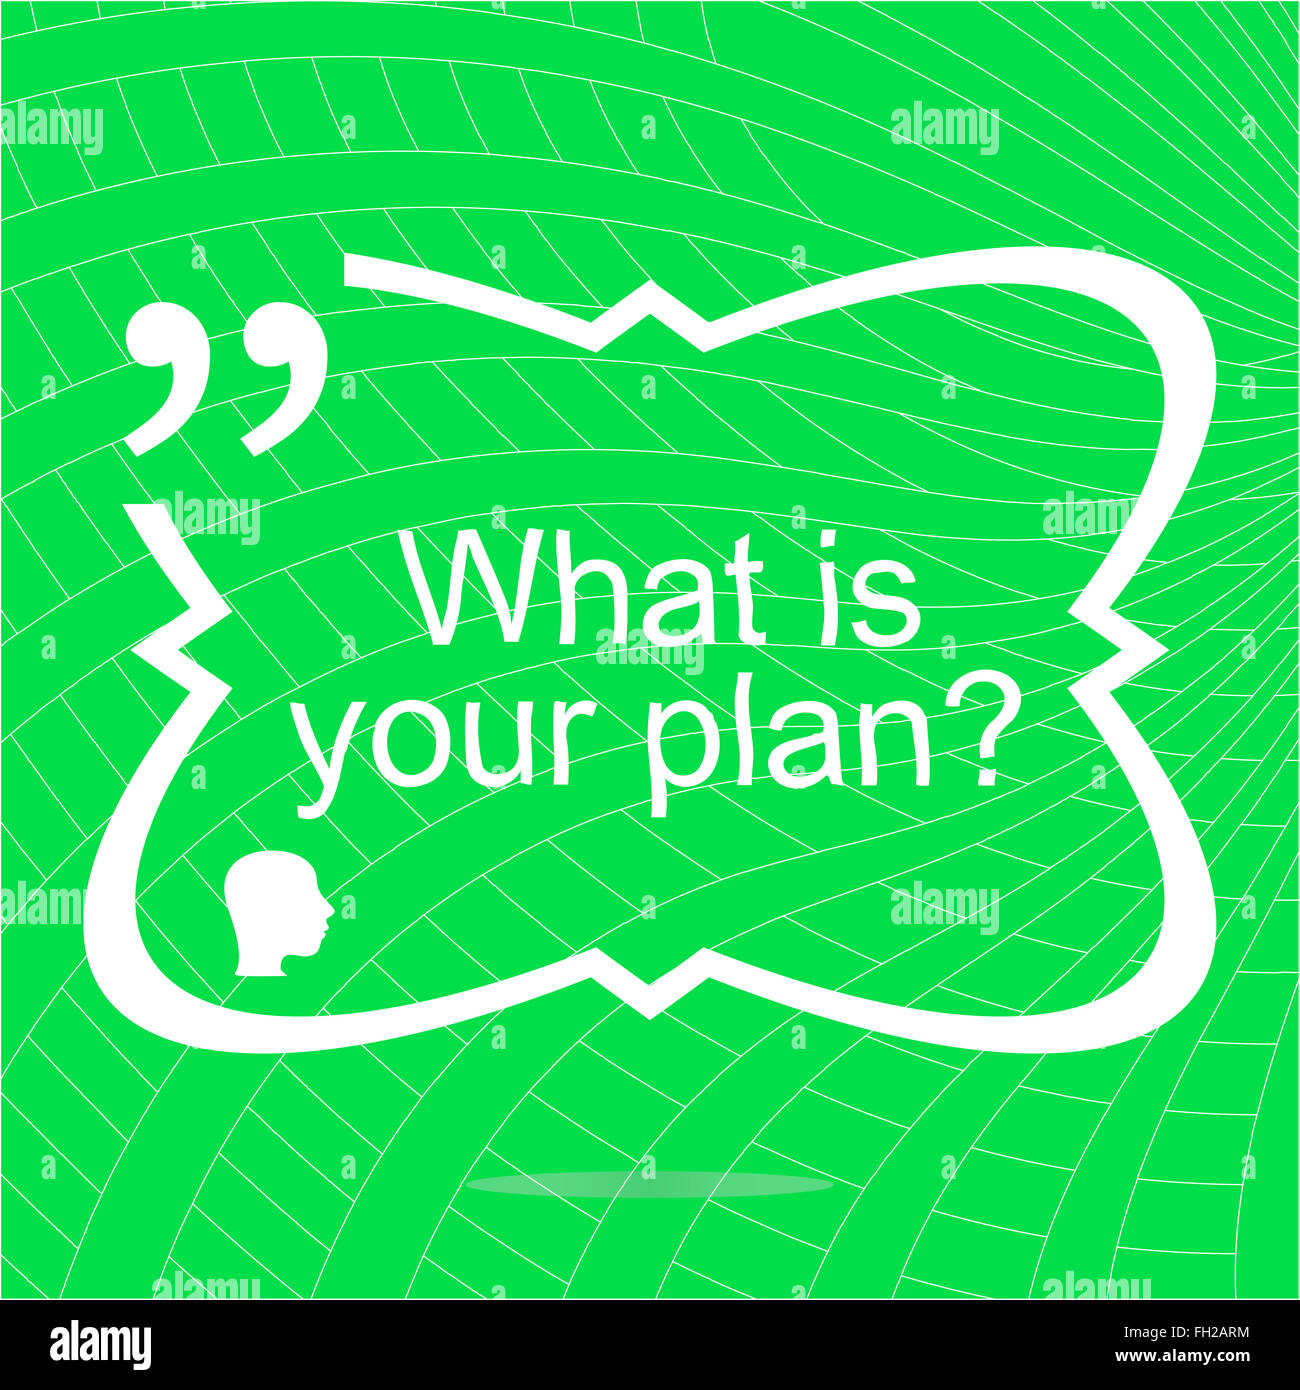 What is your plan. Inspirational motivational quote. Simple trendy design. Positive quote Stock Photo